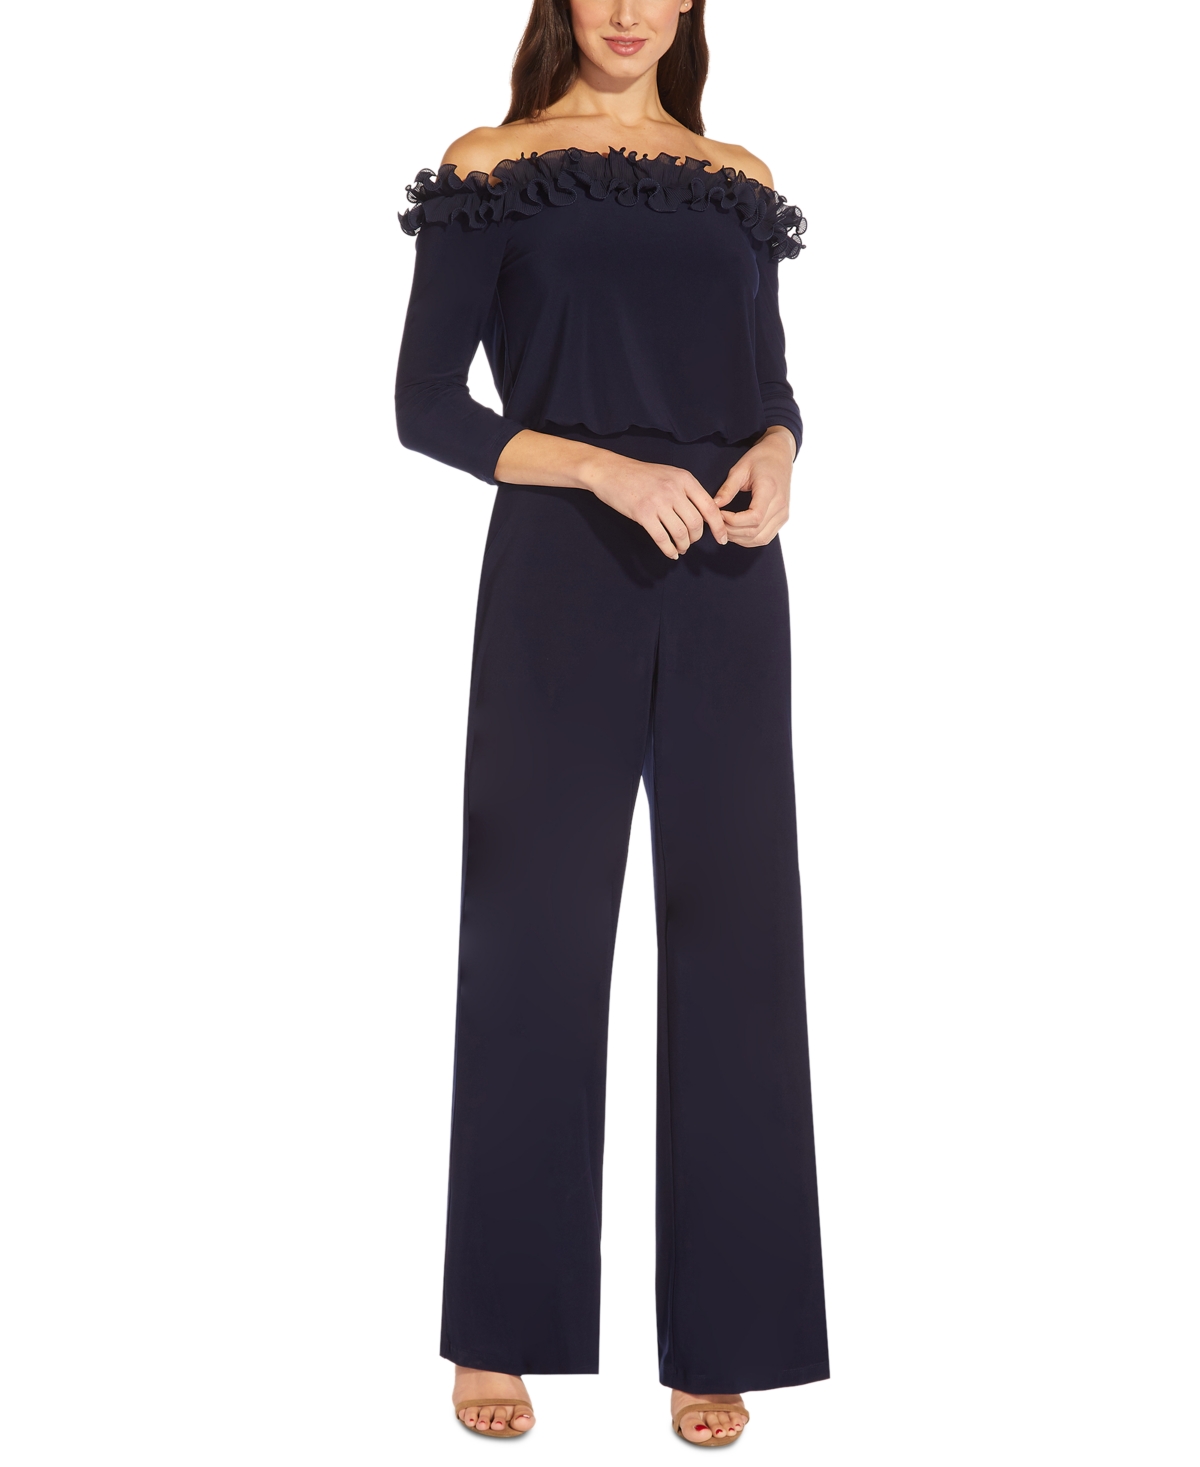 ADRIANNA PAPELL WOMEN'S OFF-THE-SHOULDER RUFFLED BLOUSON JUMPSUIT